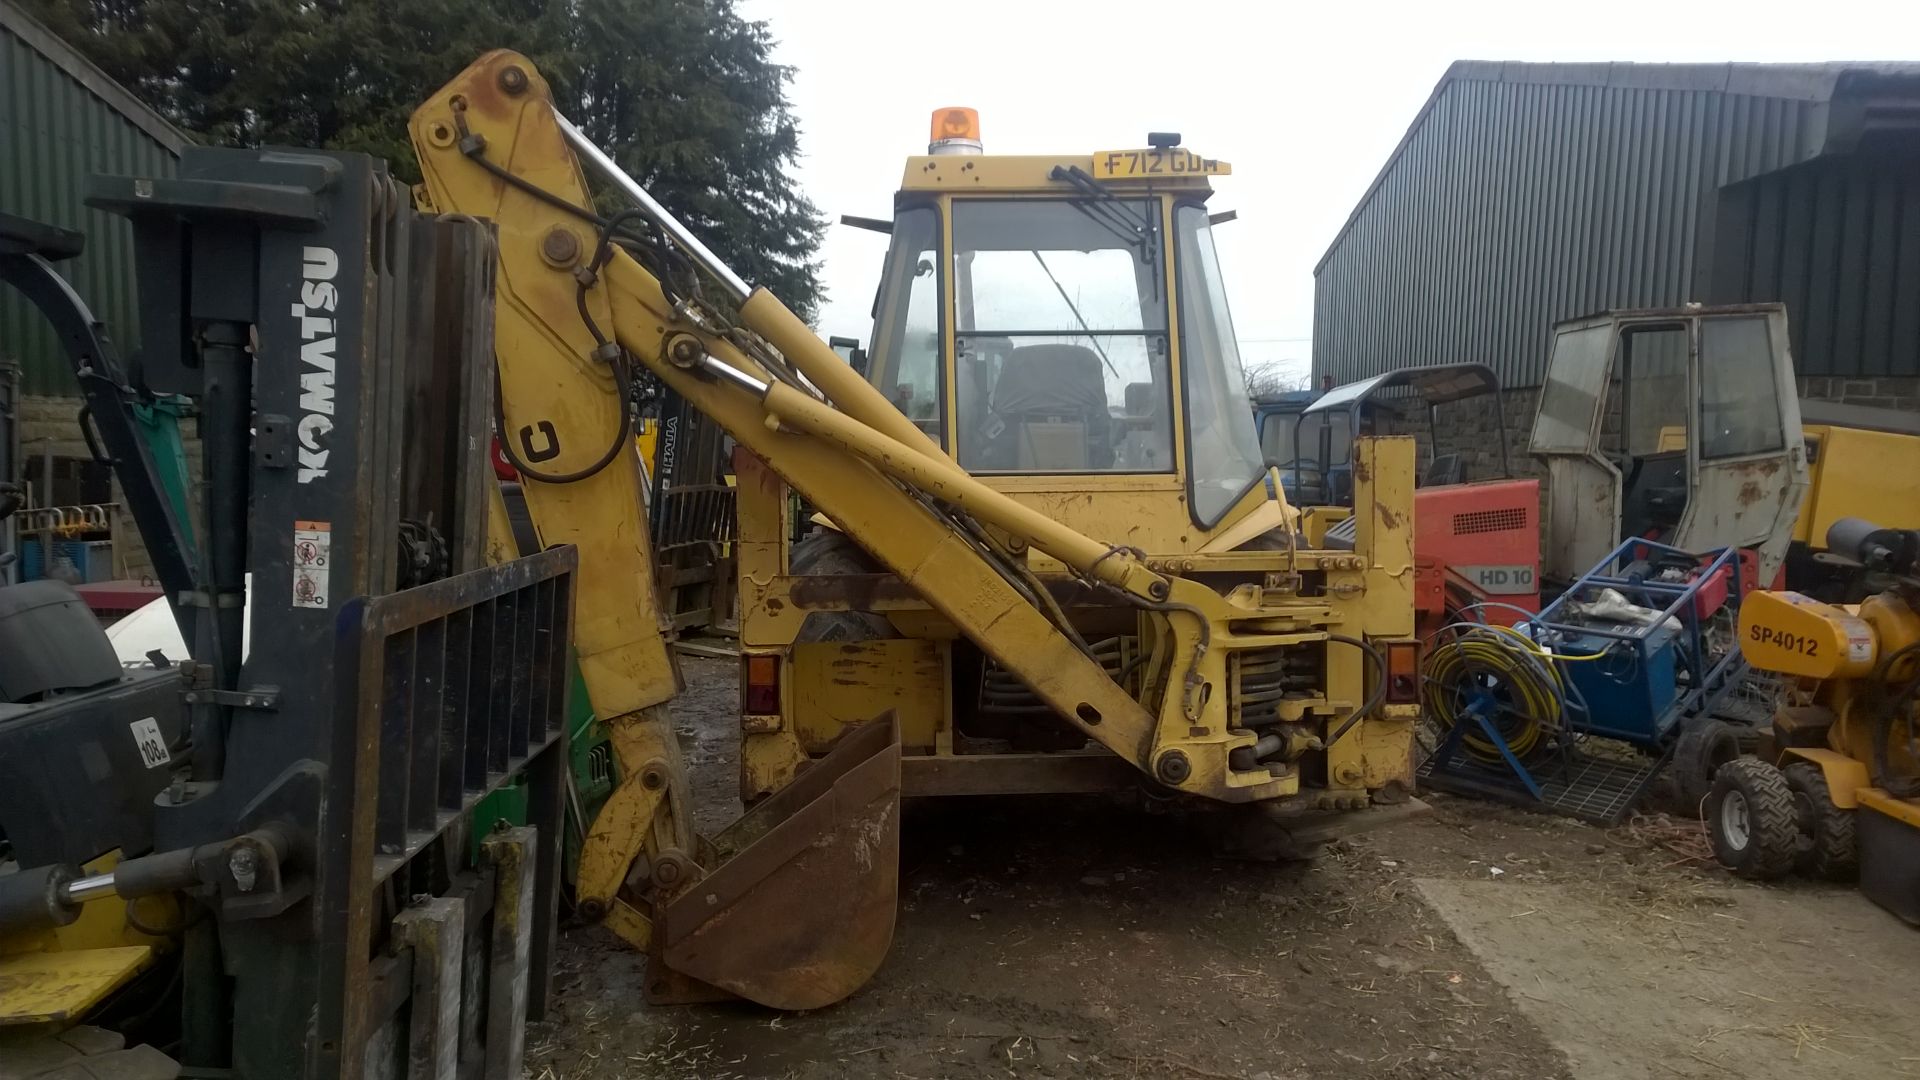 DS - 1988/F REG CATERPILLAR 428 4X4 EXCAVATOR/DIGGER - WITH A 4 IN 1 BUCKET *PLUS VAT*   SHOWING 1 - Image 13 of 13